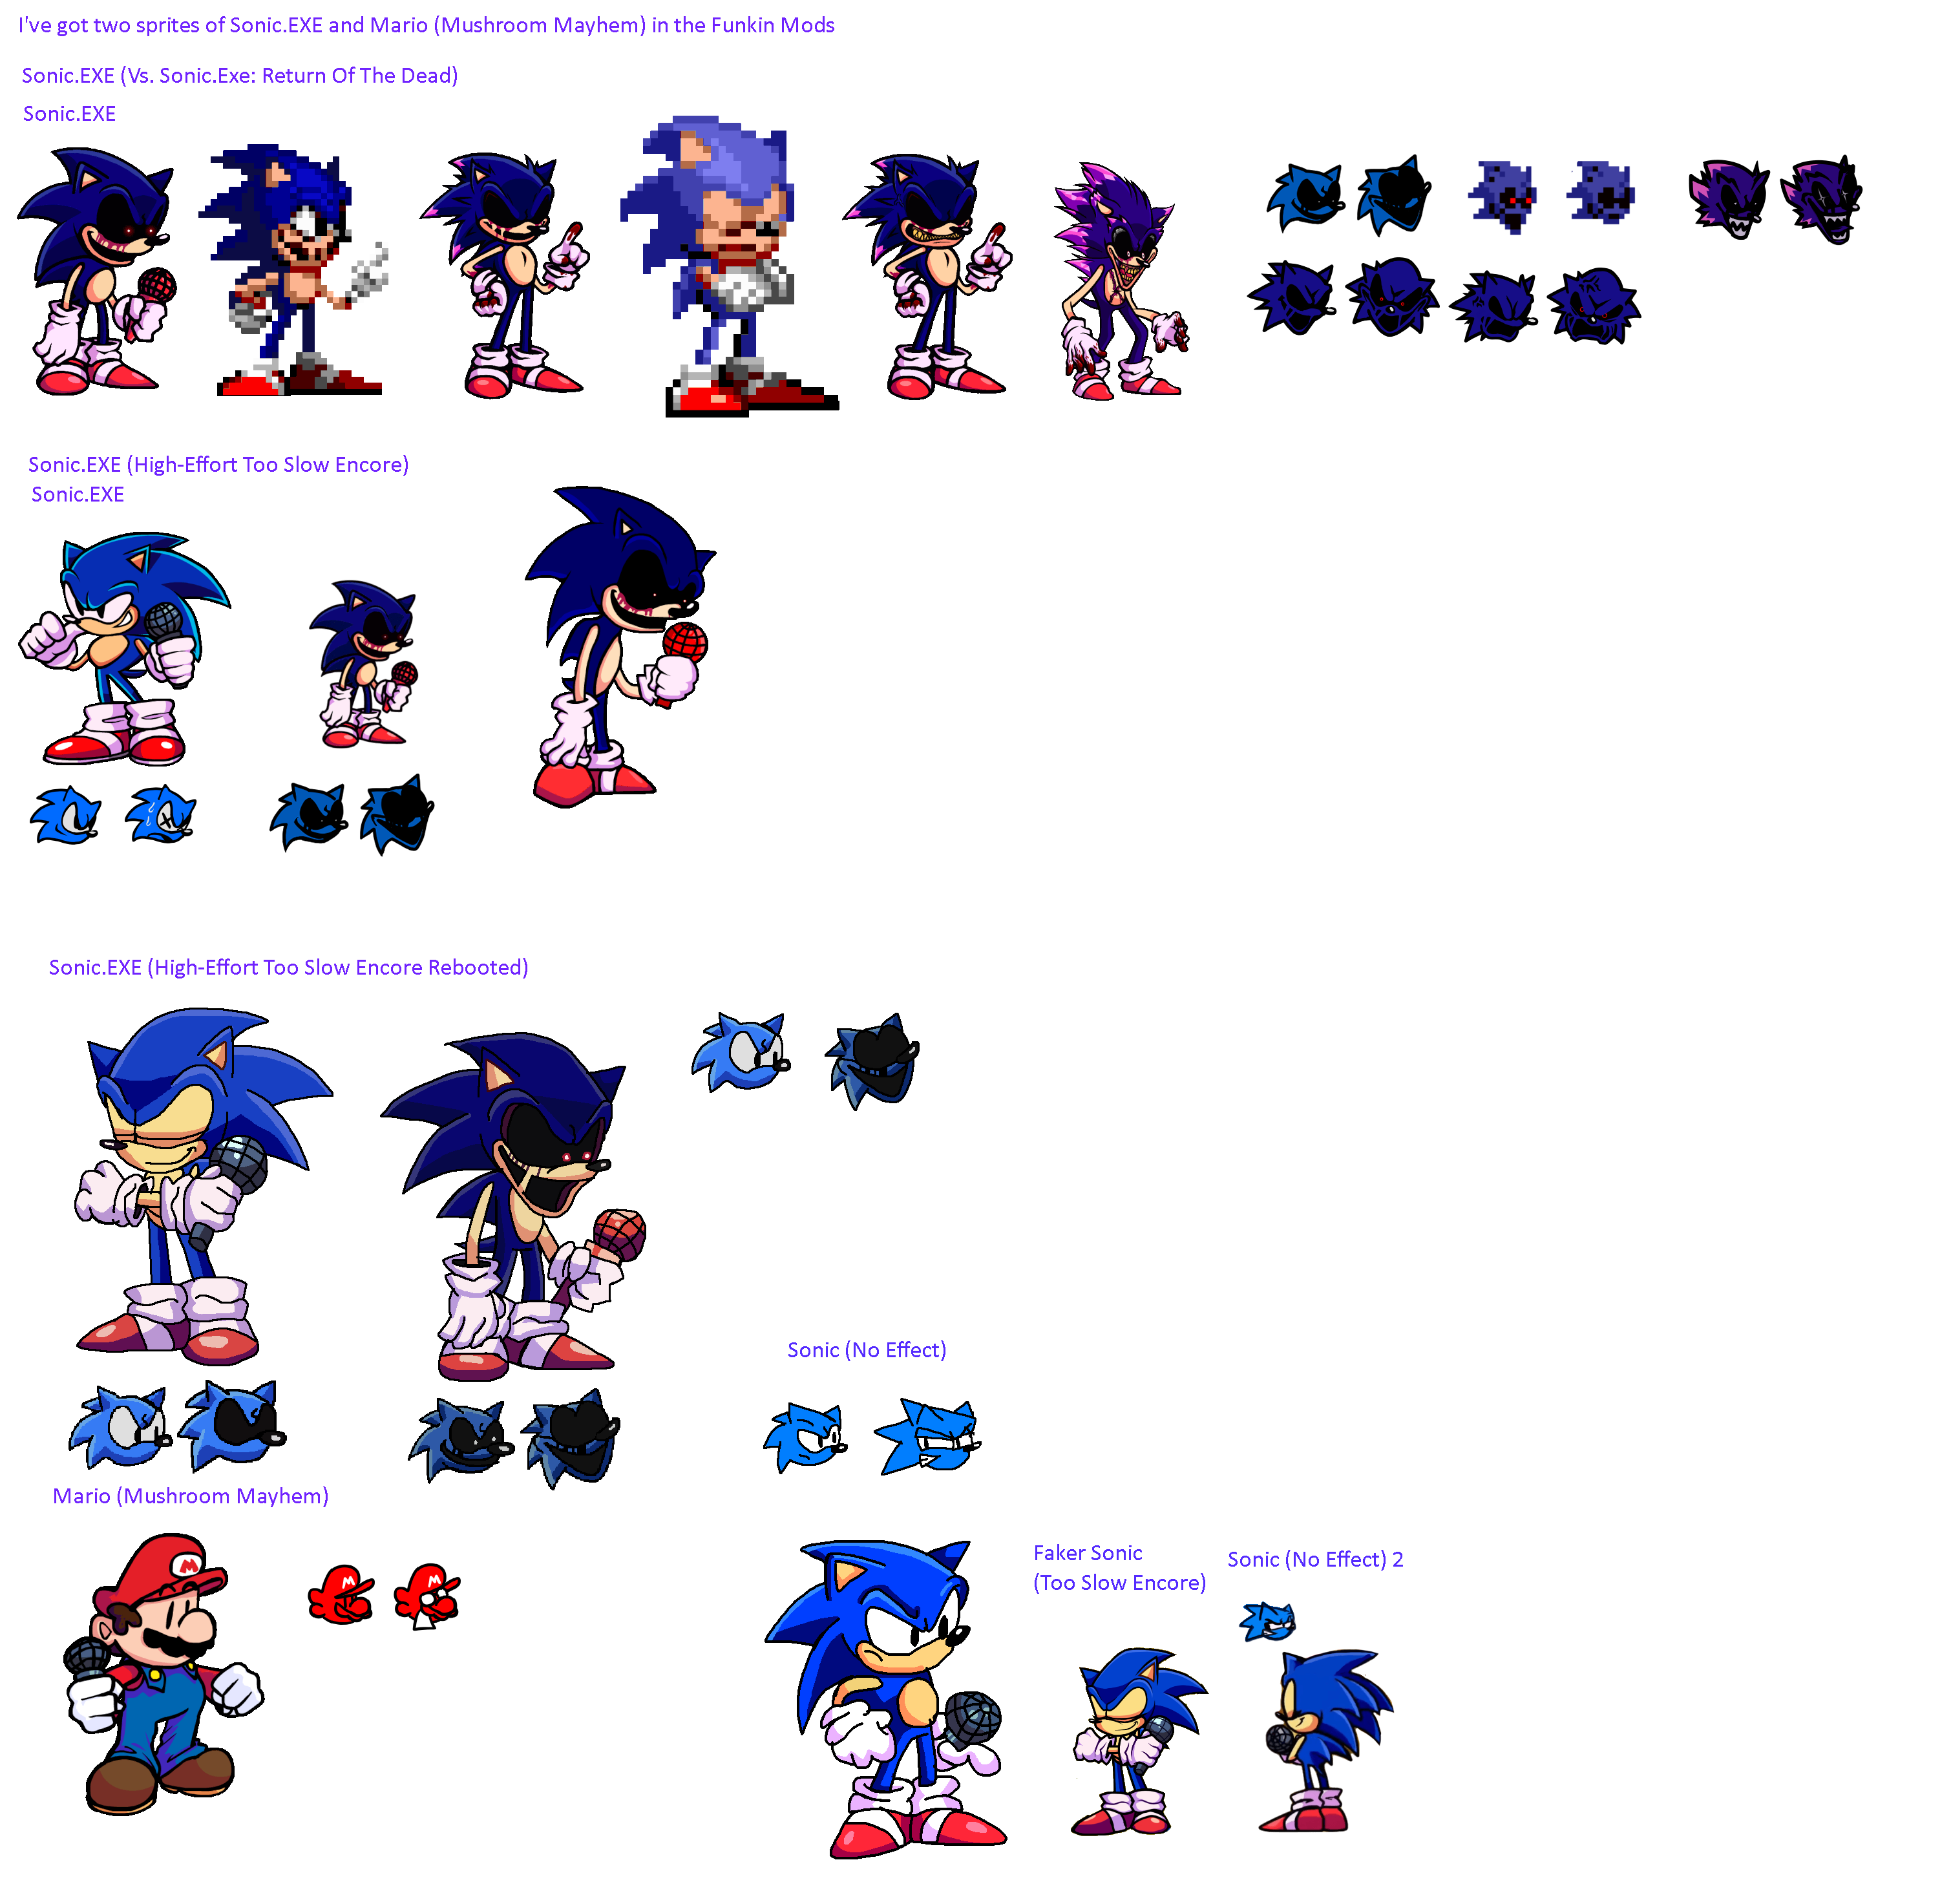 Friday Night Funkin' - Sonic.exe Remade Sprites by tent2 on DeviantArt